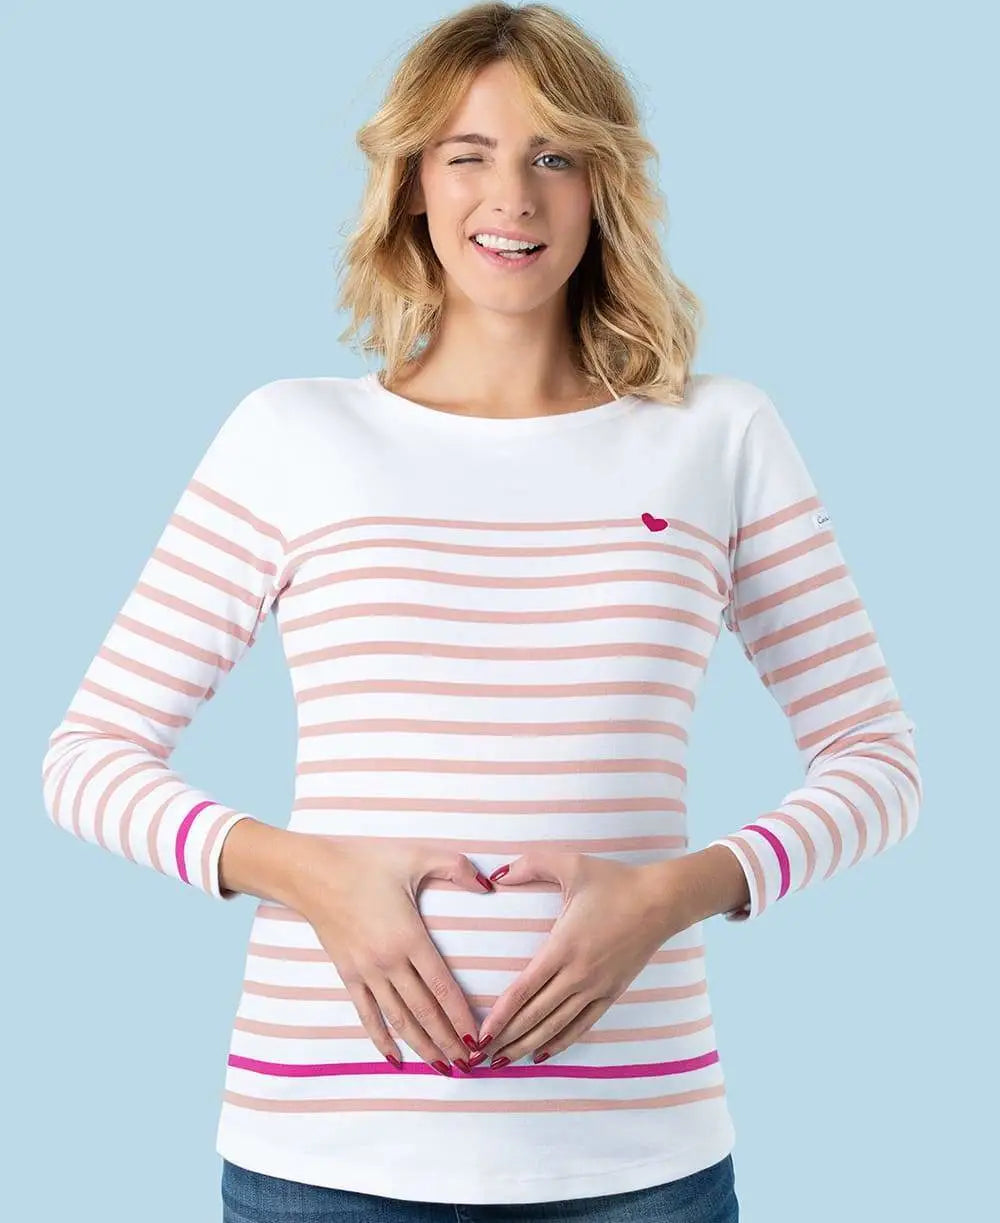 Maternity top Brest - Made in France white and pink